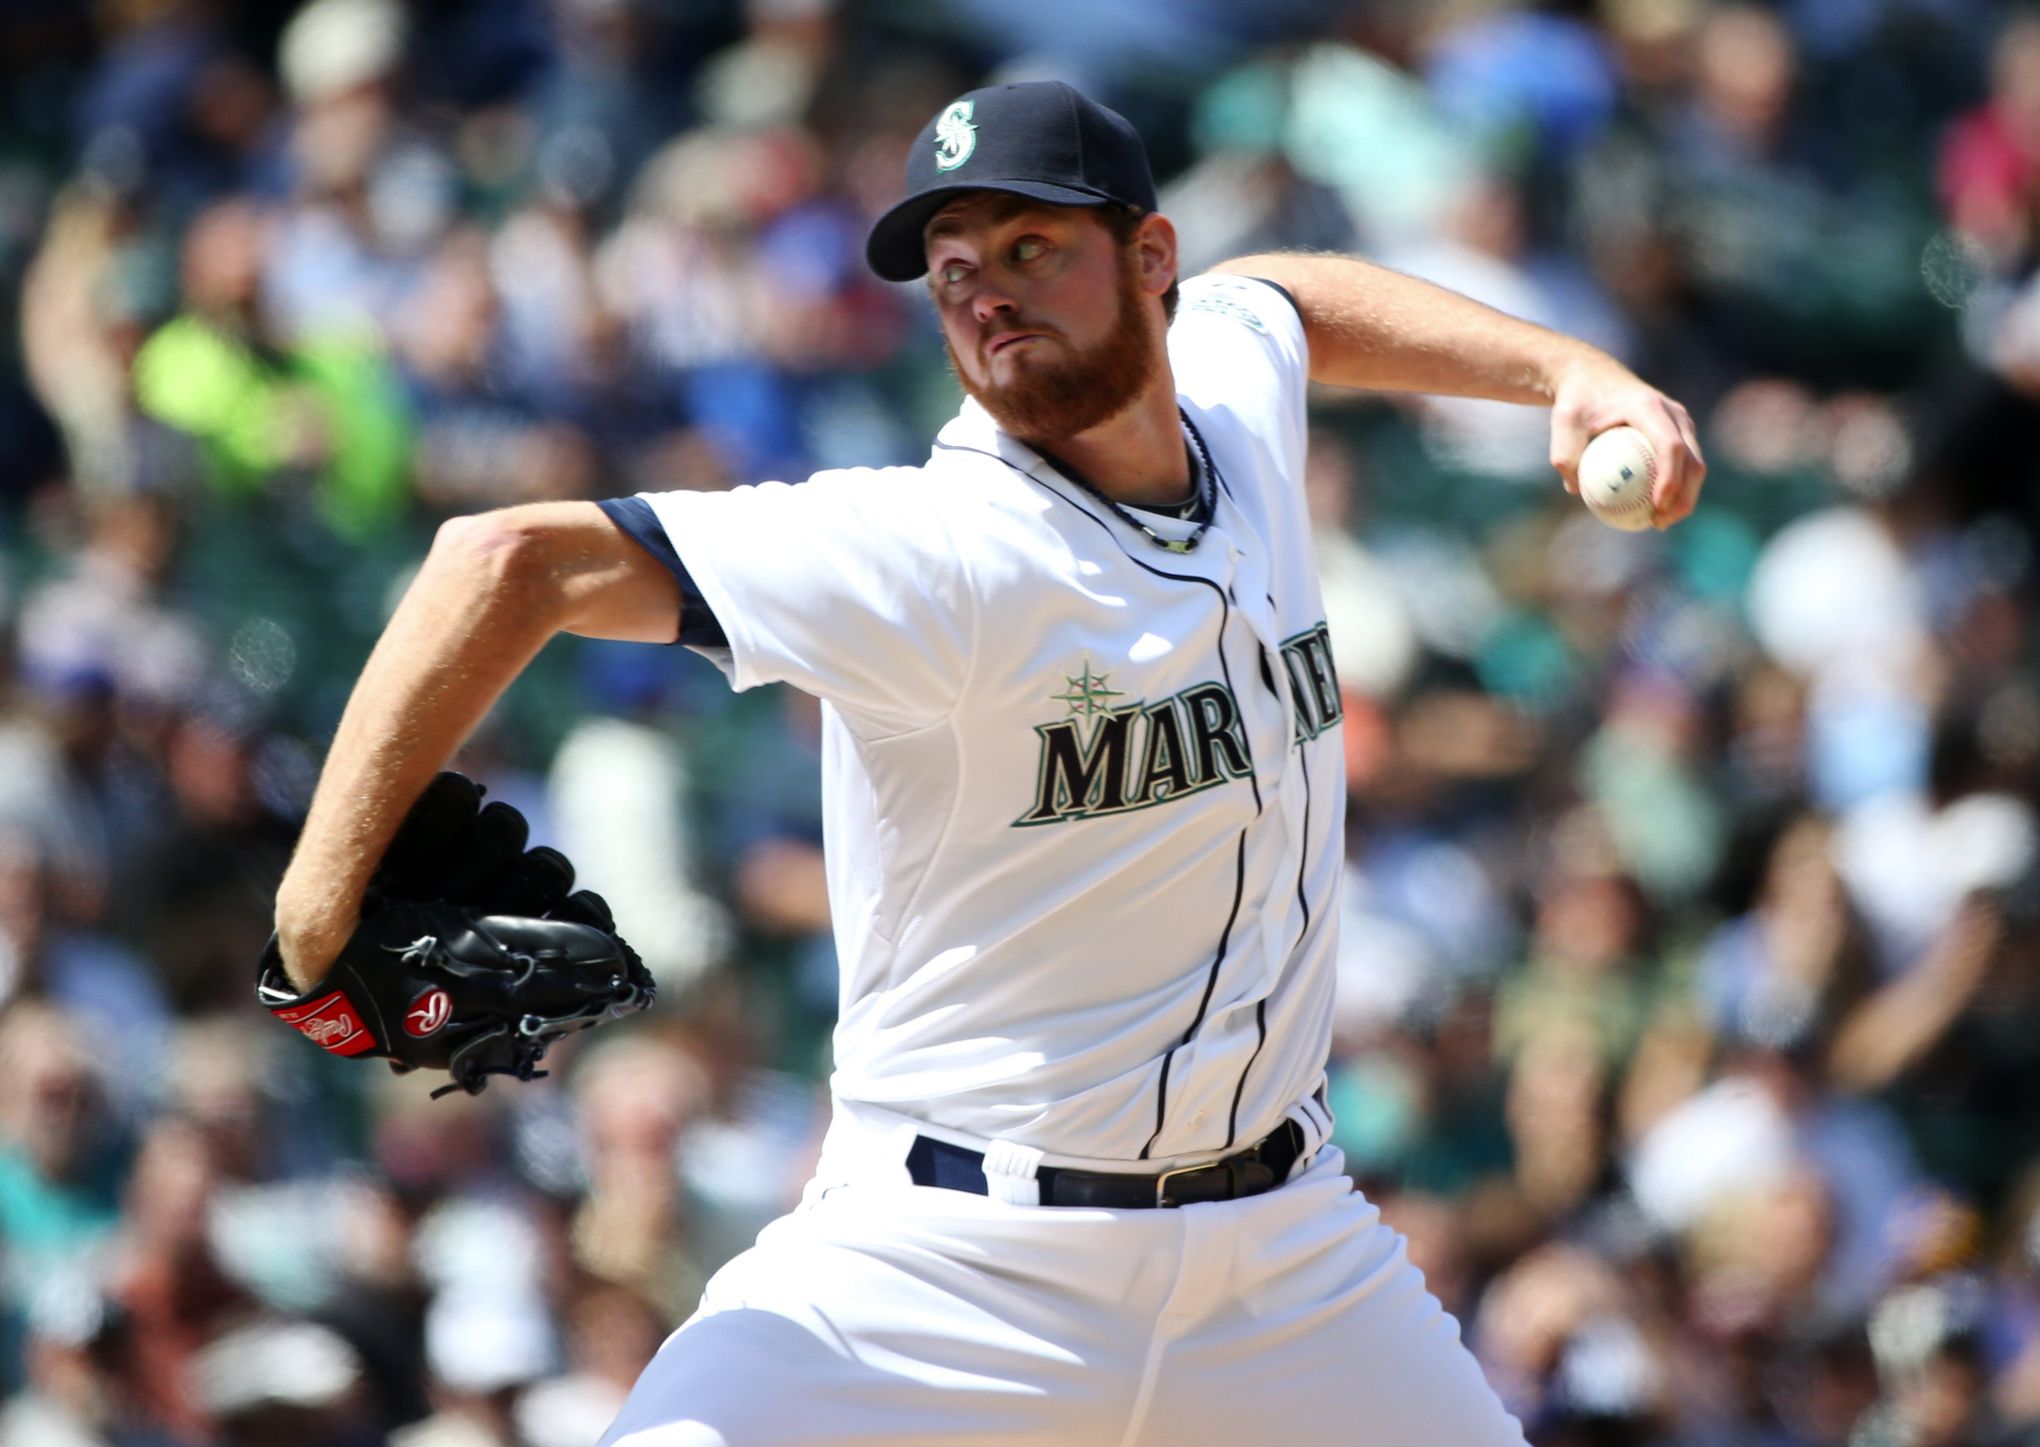 Furbush reinstated from 60-day disabled list